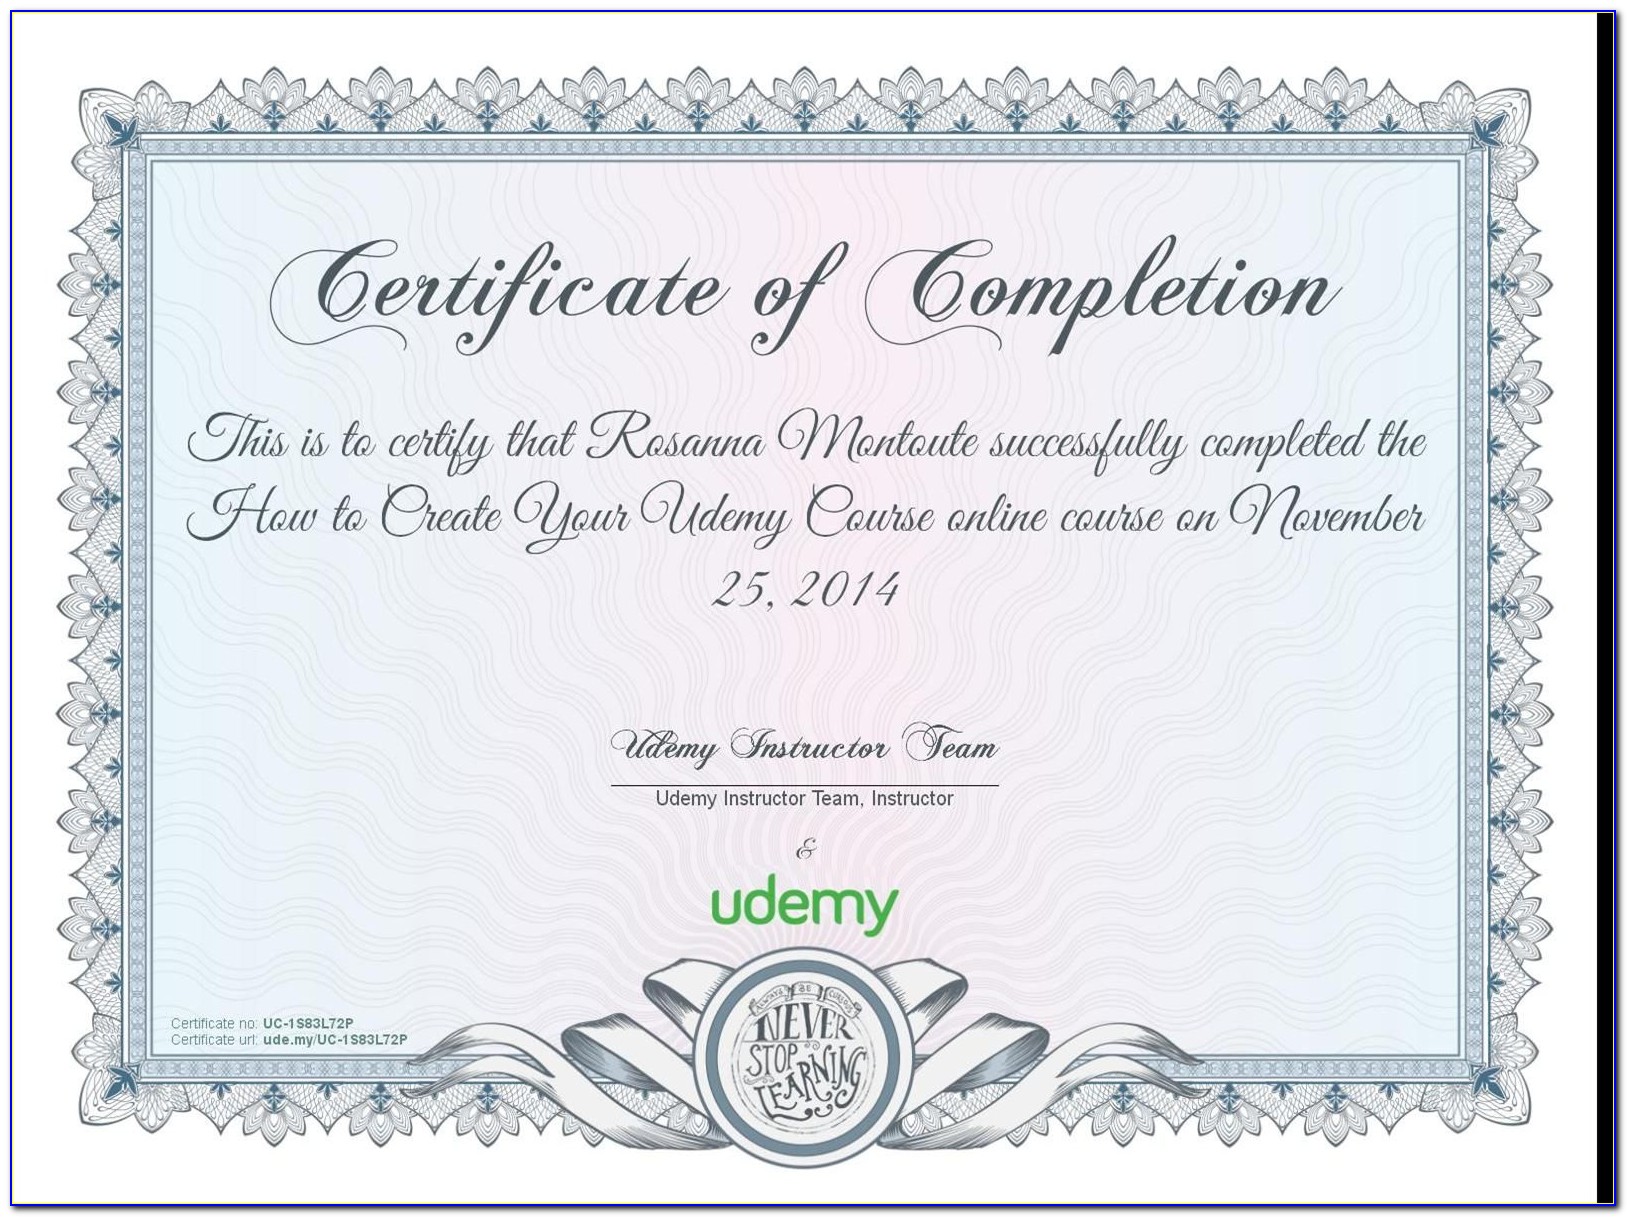 Udemy Certificate Of Completion Generator